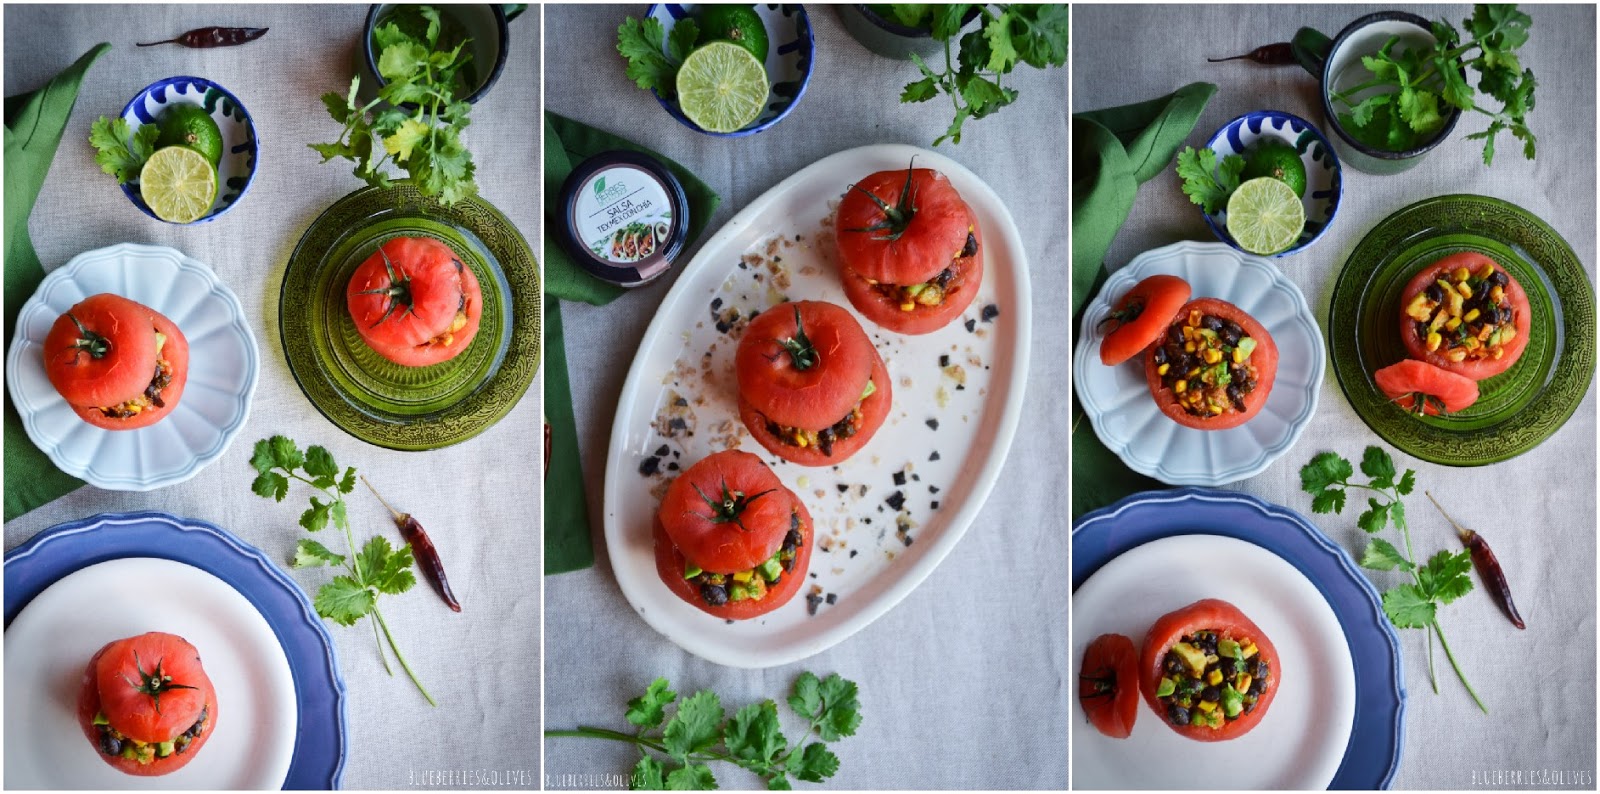 AERIAL VIEW STUFFED TOMATOES IN VINTAGE PORCELAIN DISH, GREEN KITCHEN CLOTH, CILANTRO LEAVES, SALT FLAKES, LIME WEDGES